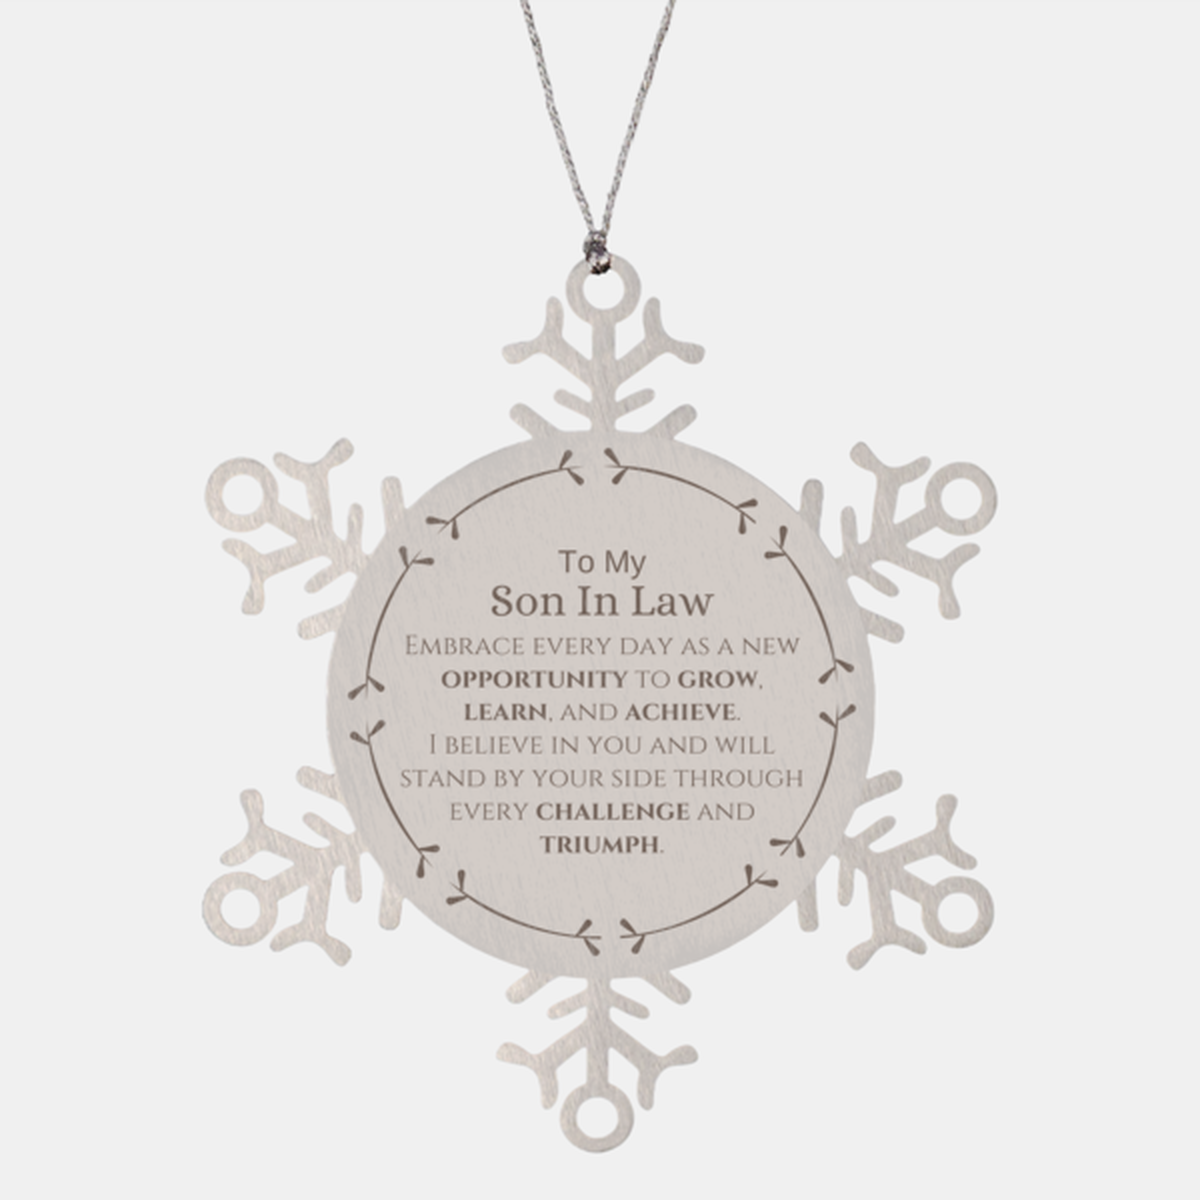 To My Son In Law Gifts, I believe in you and will stand by your side, Inspirational Snowflake Ornament For Son In Law, Birthday Christmas Motivational Son In Law Gifts